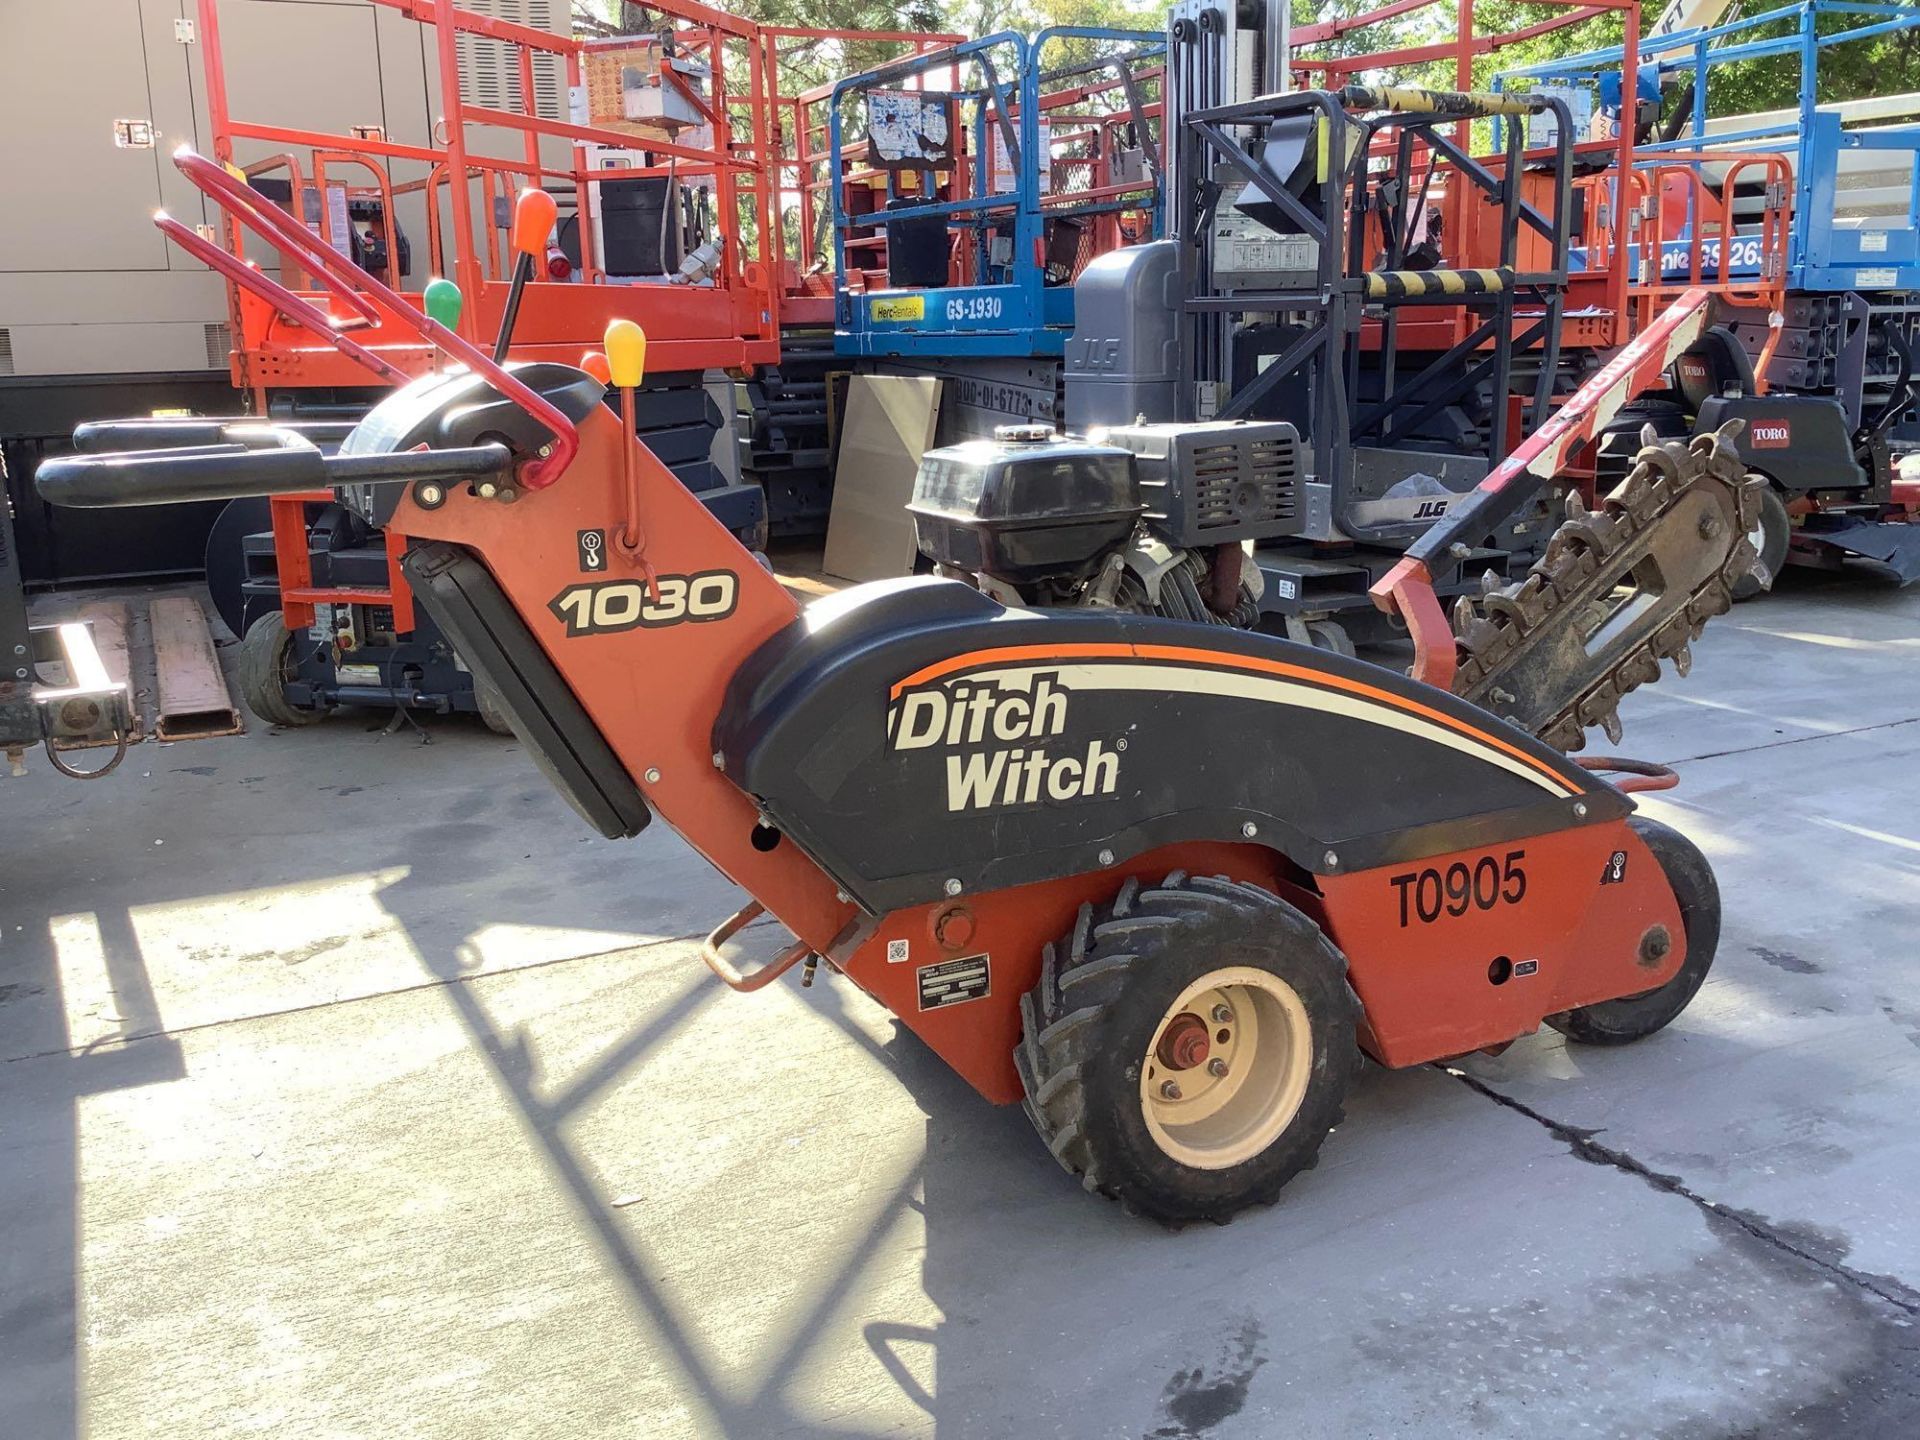 DITCH WITCH WALK BEHIND TRENCHER MODEL 1030, GAS POWERED, RUNS & OPERATES